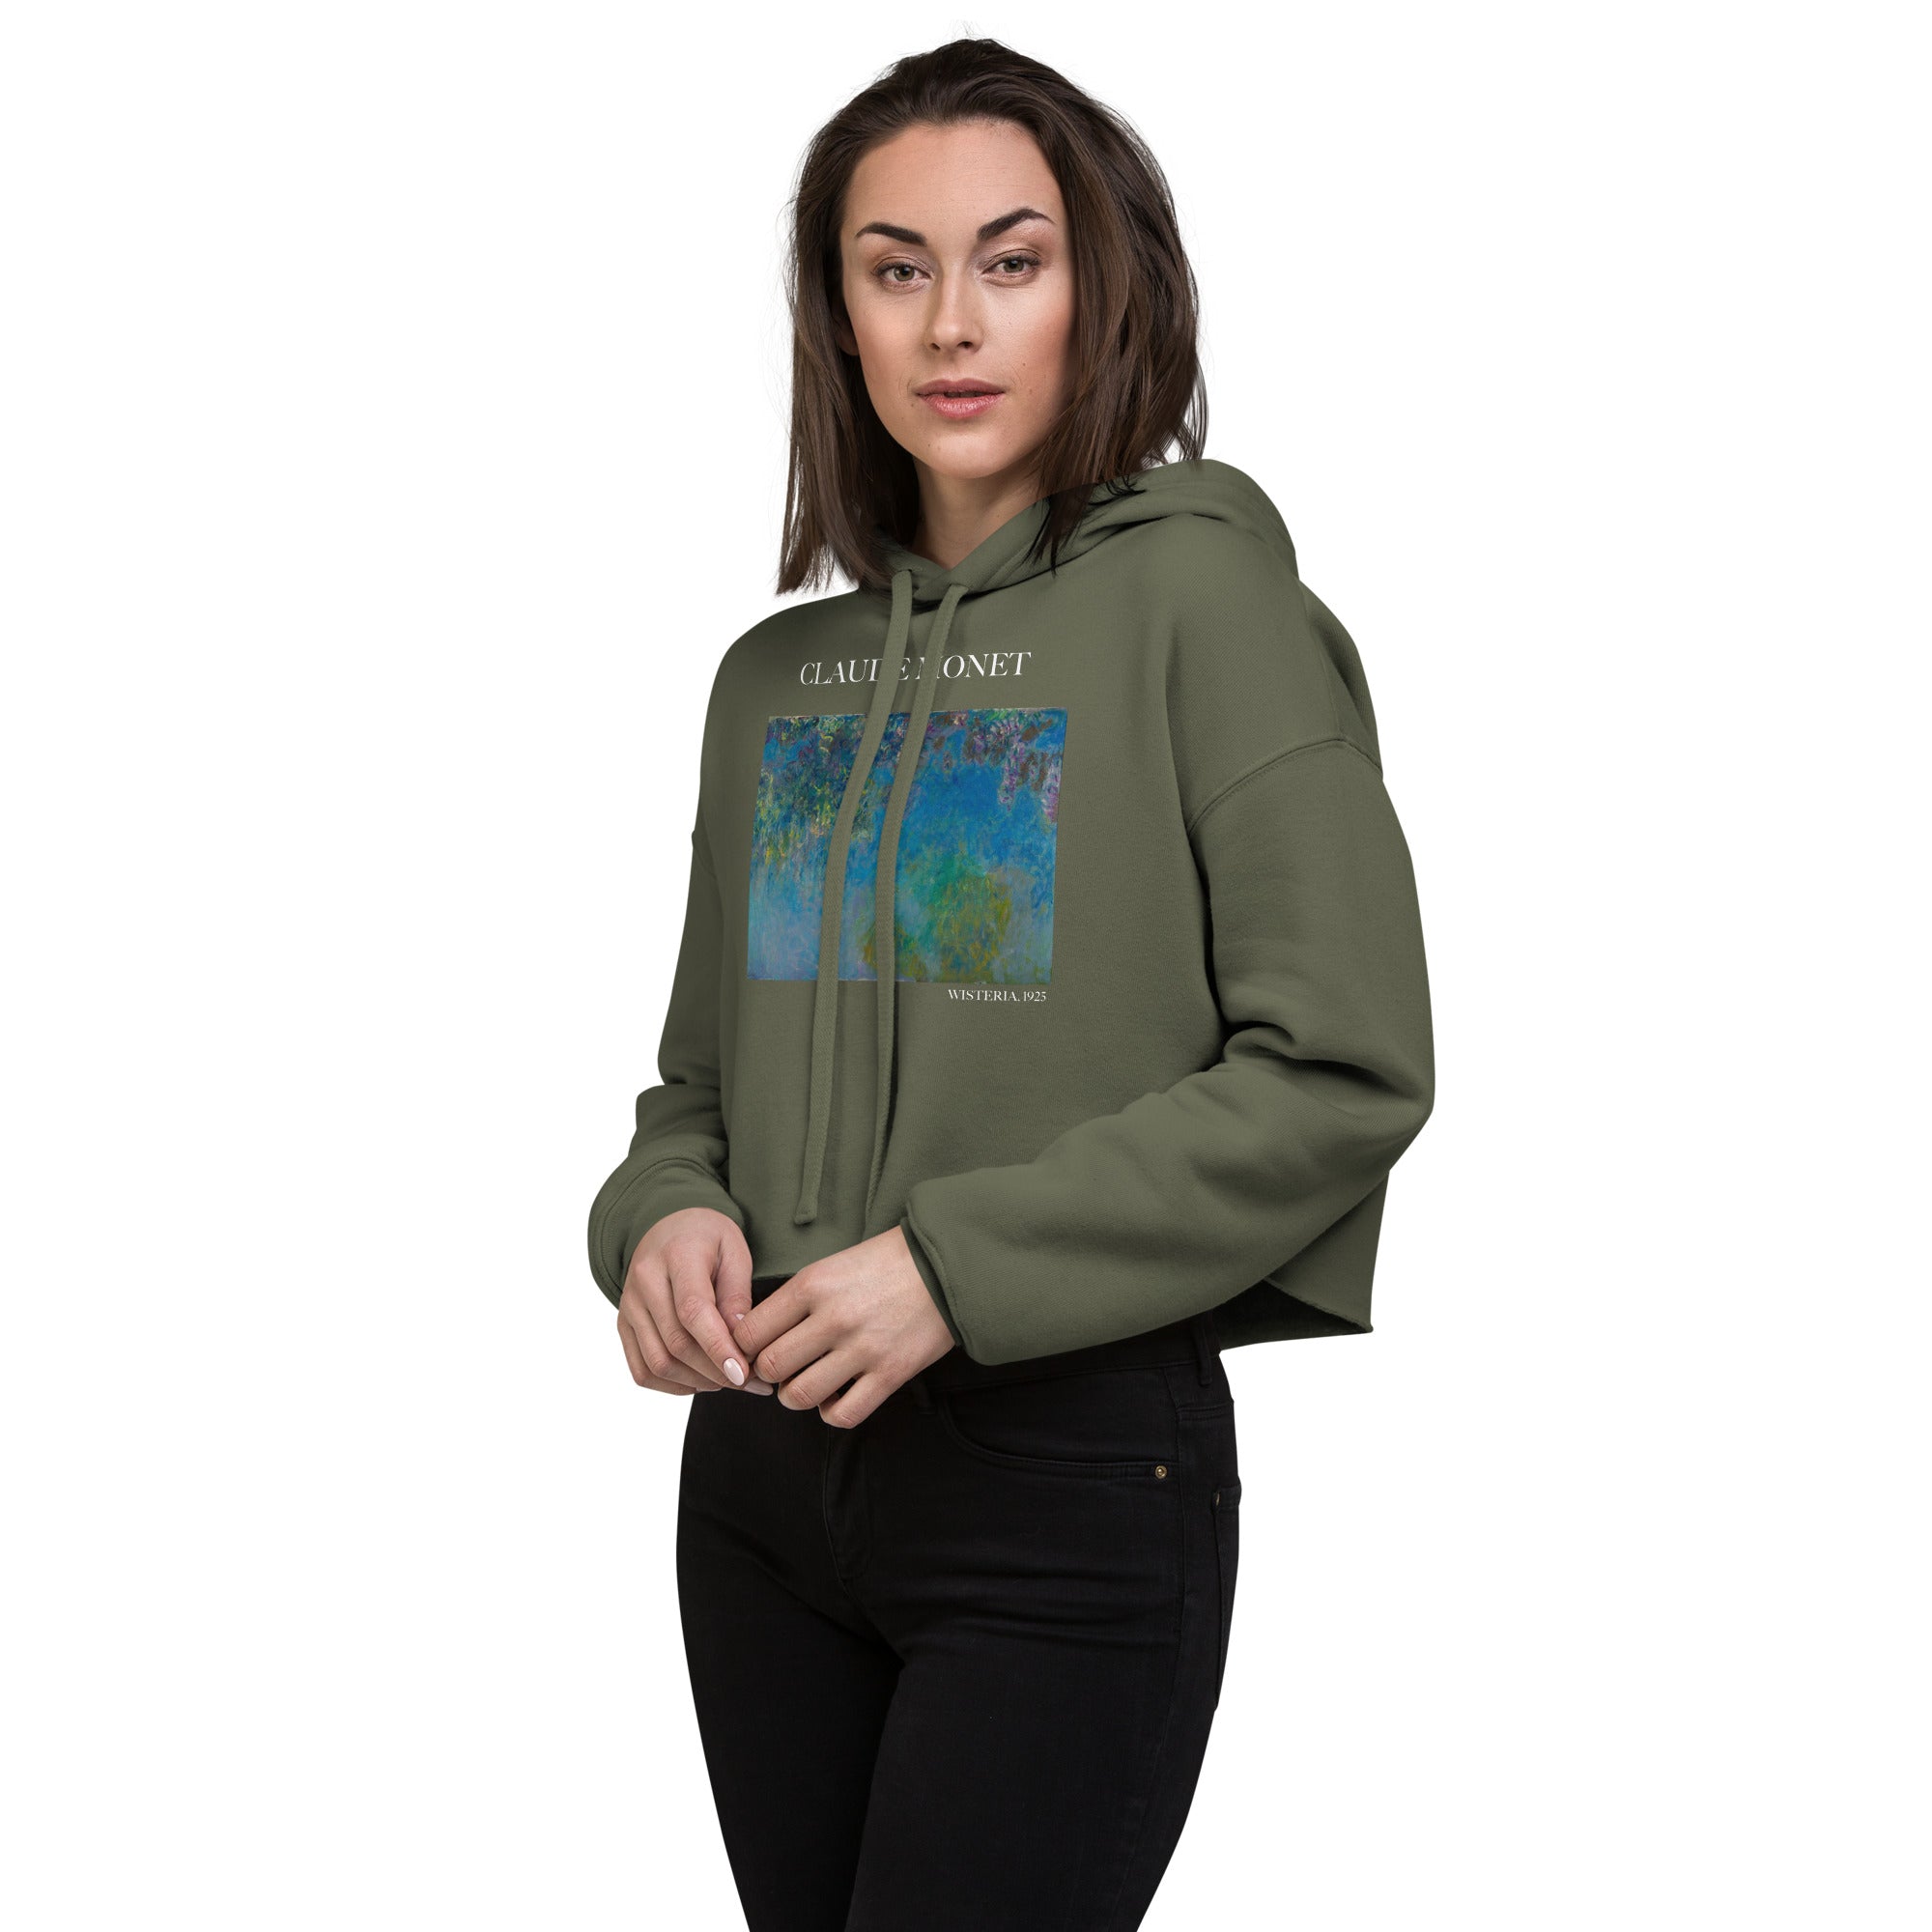 Claude Monet 'Wisteria' Famous Painting Cropped Hoodie | Premium Art Cropped Hoodie